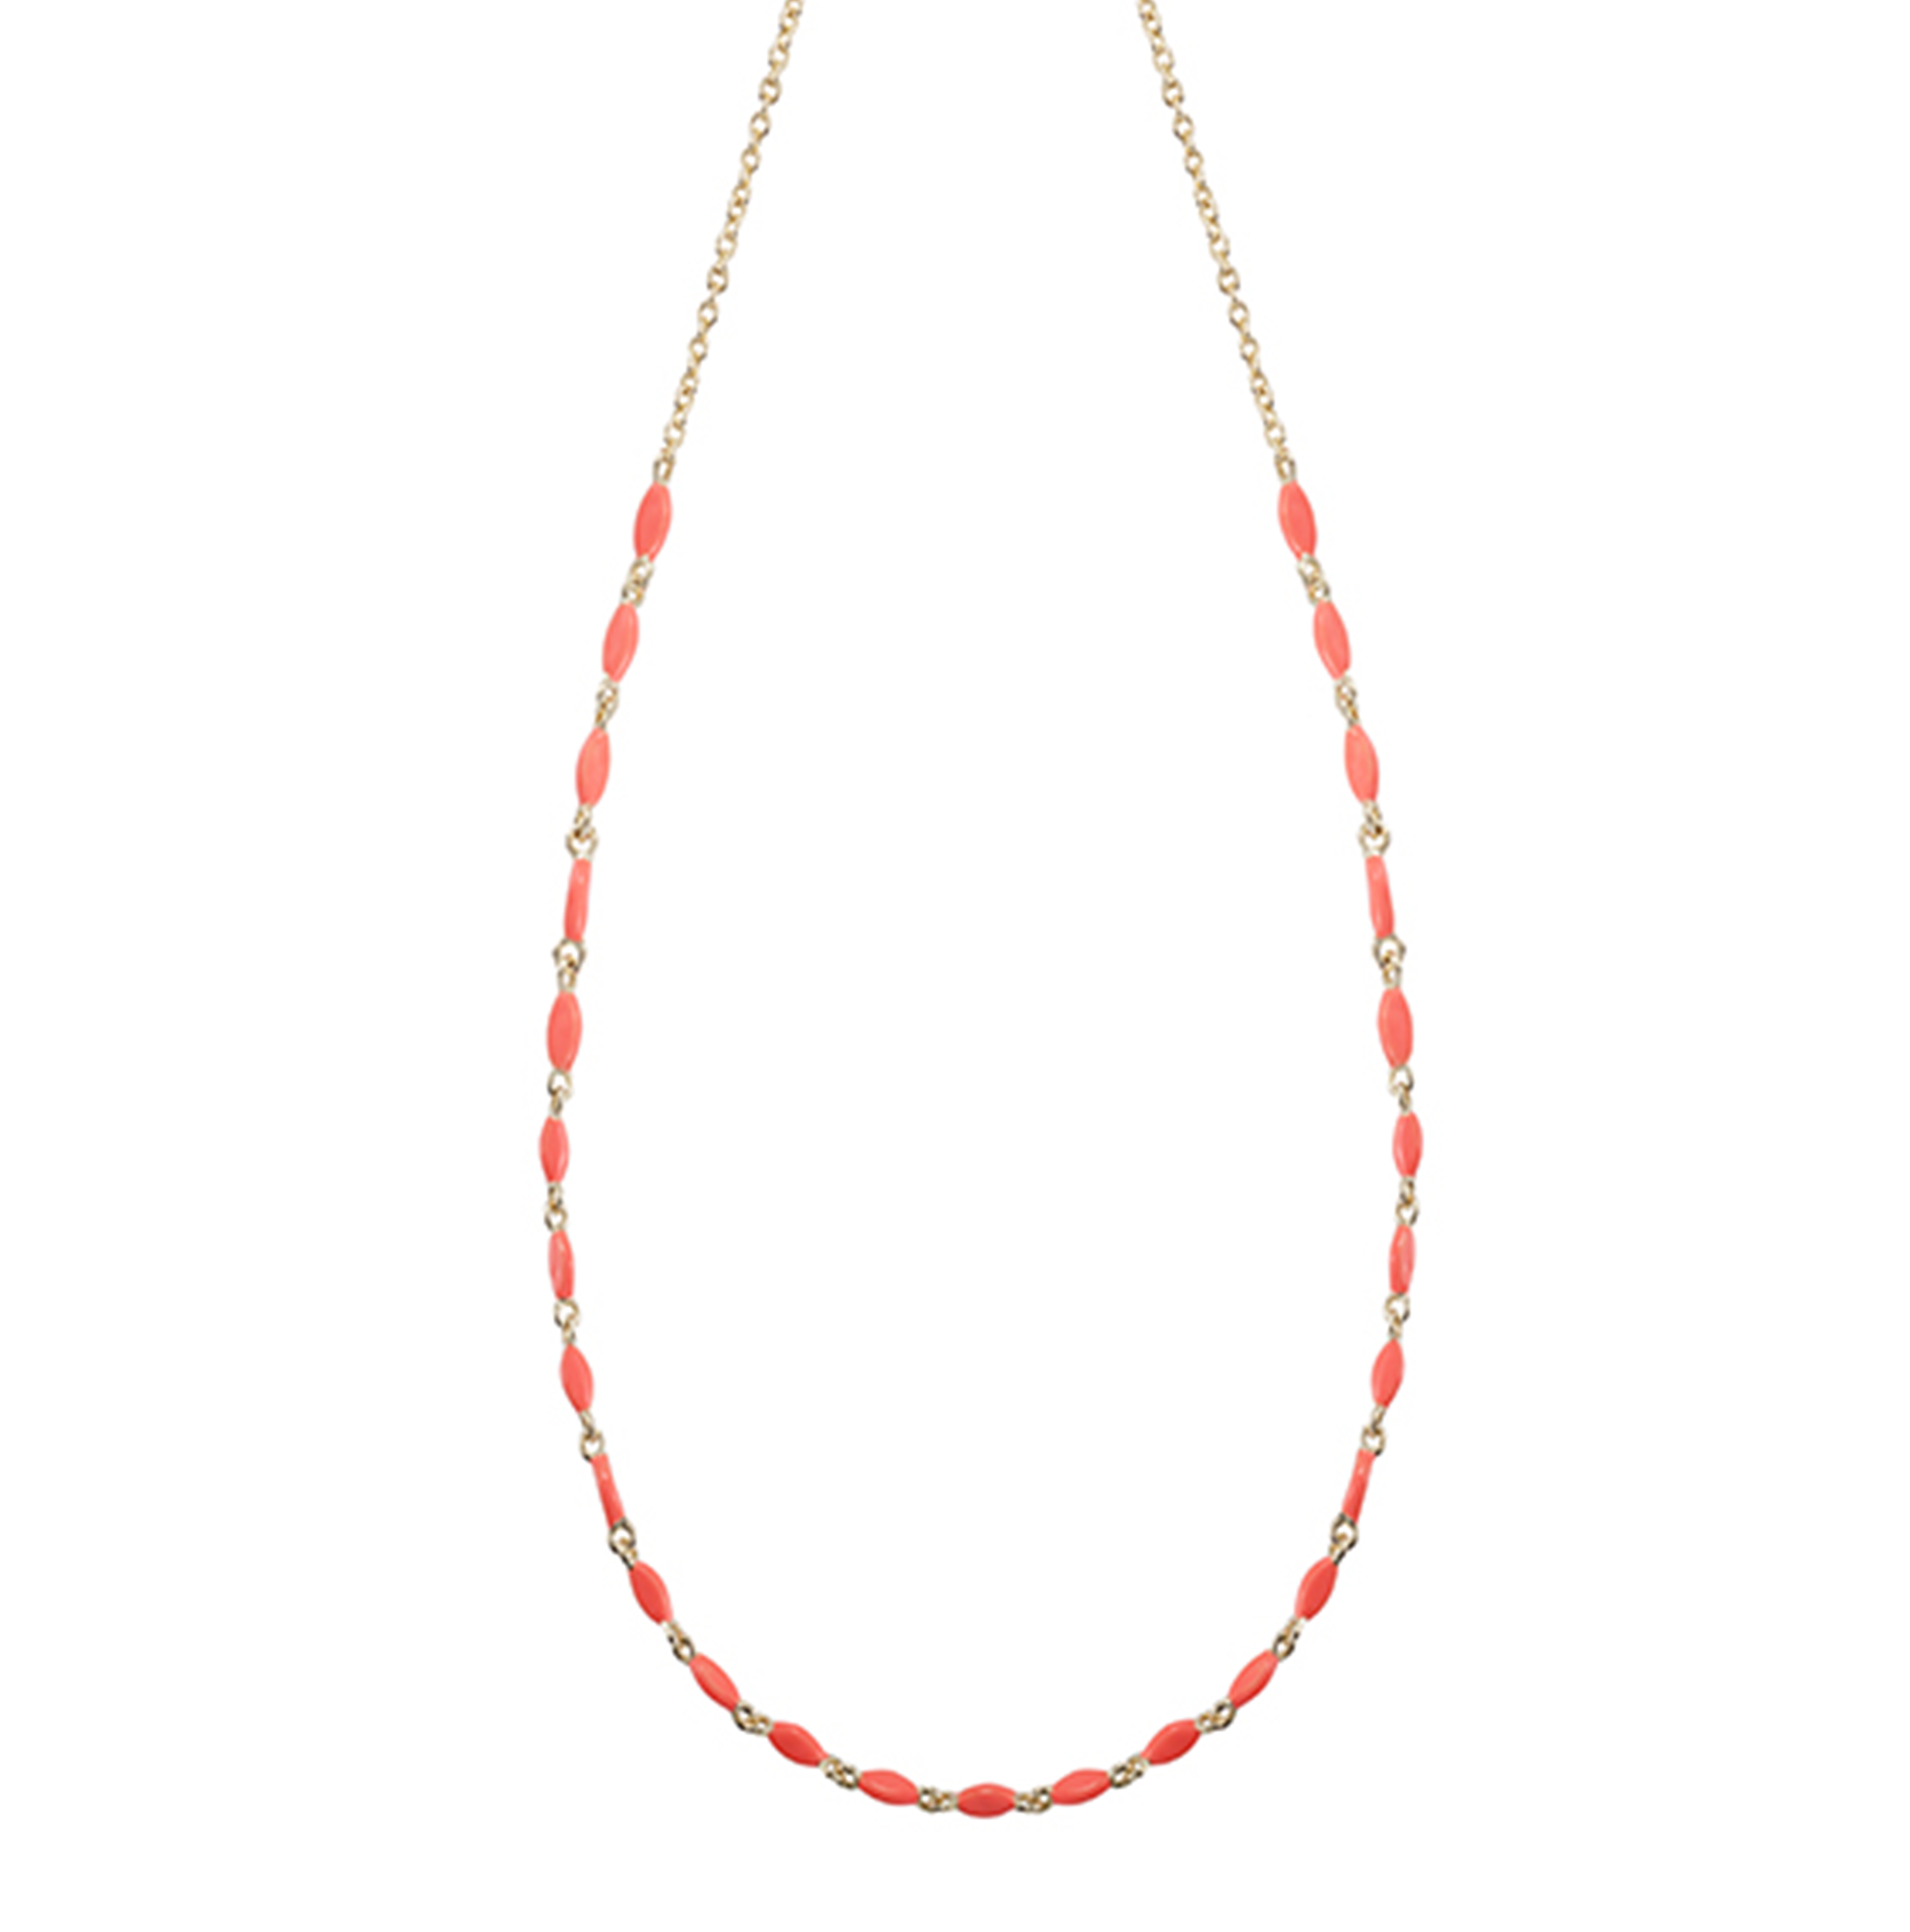 Free Spirit Adjustable Necklace in Coral